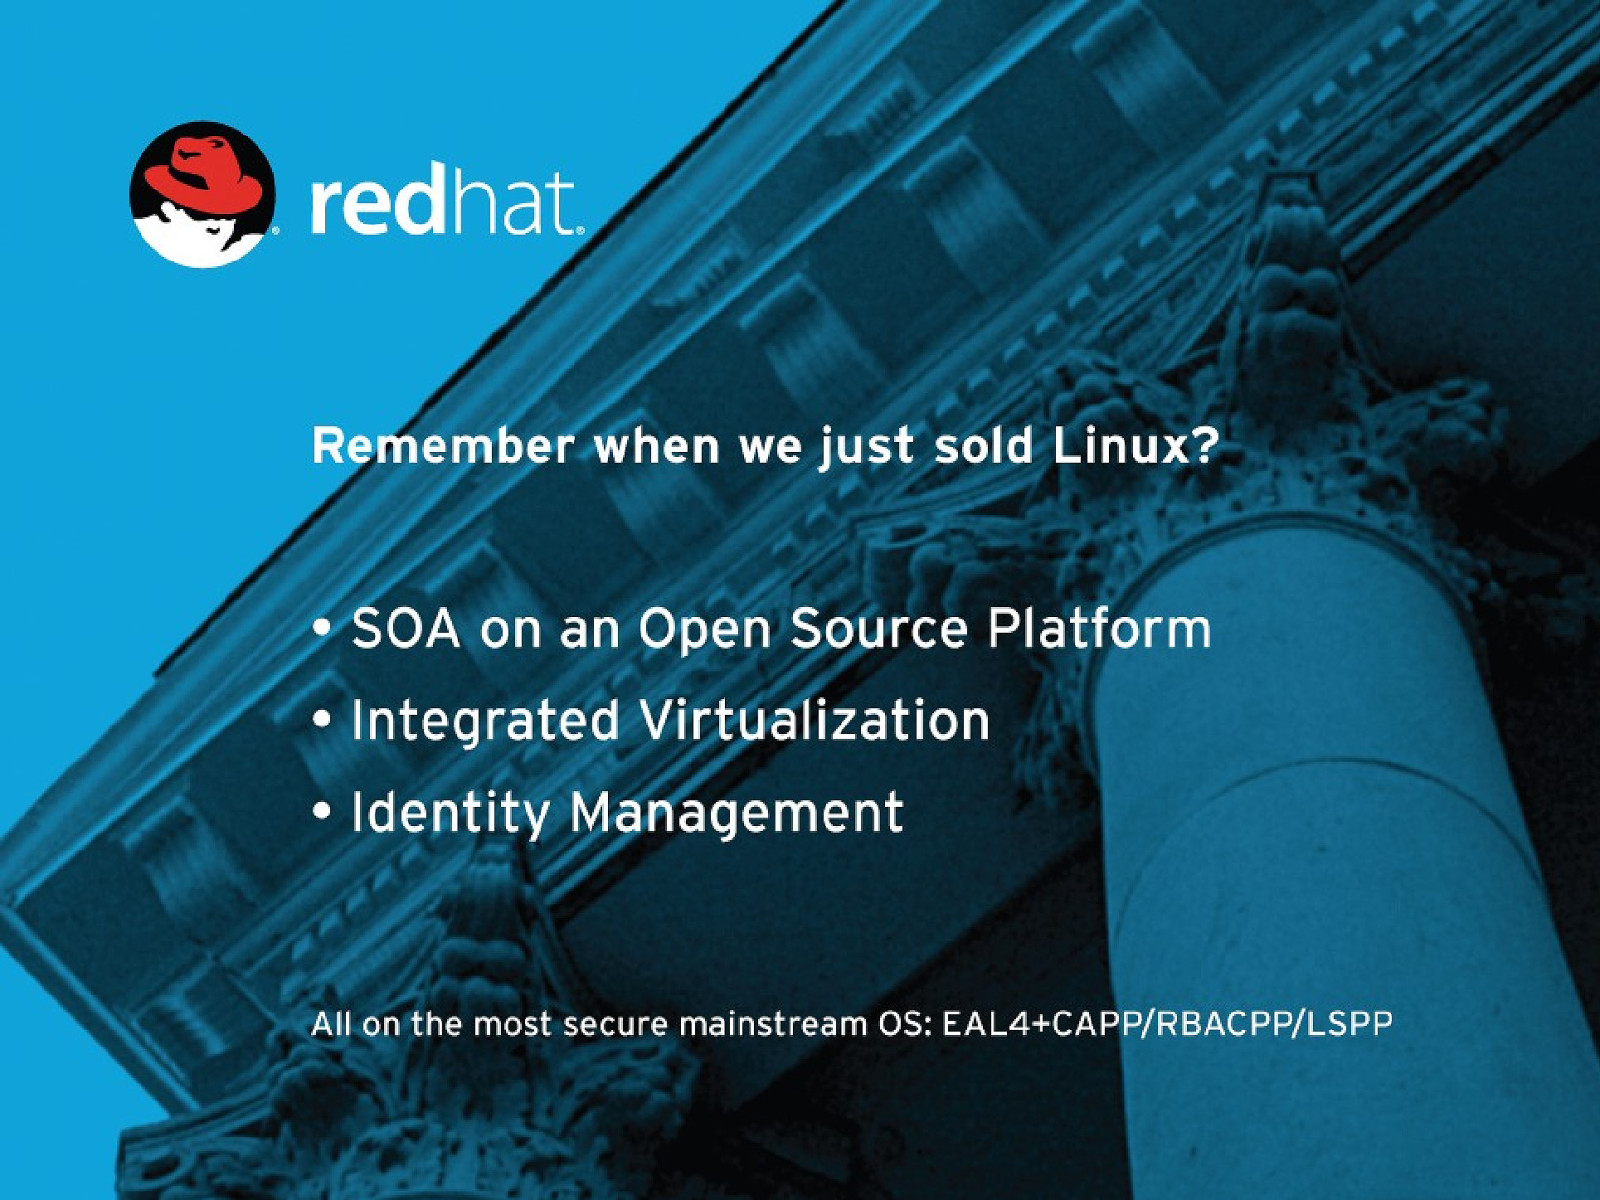 Remember when we just sold Linux? Intro to Red Hat Middleware.